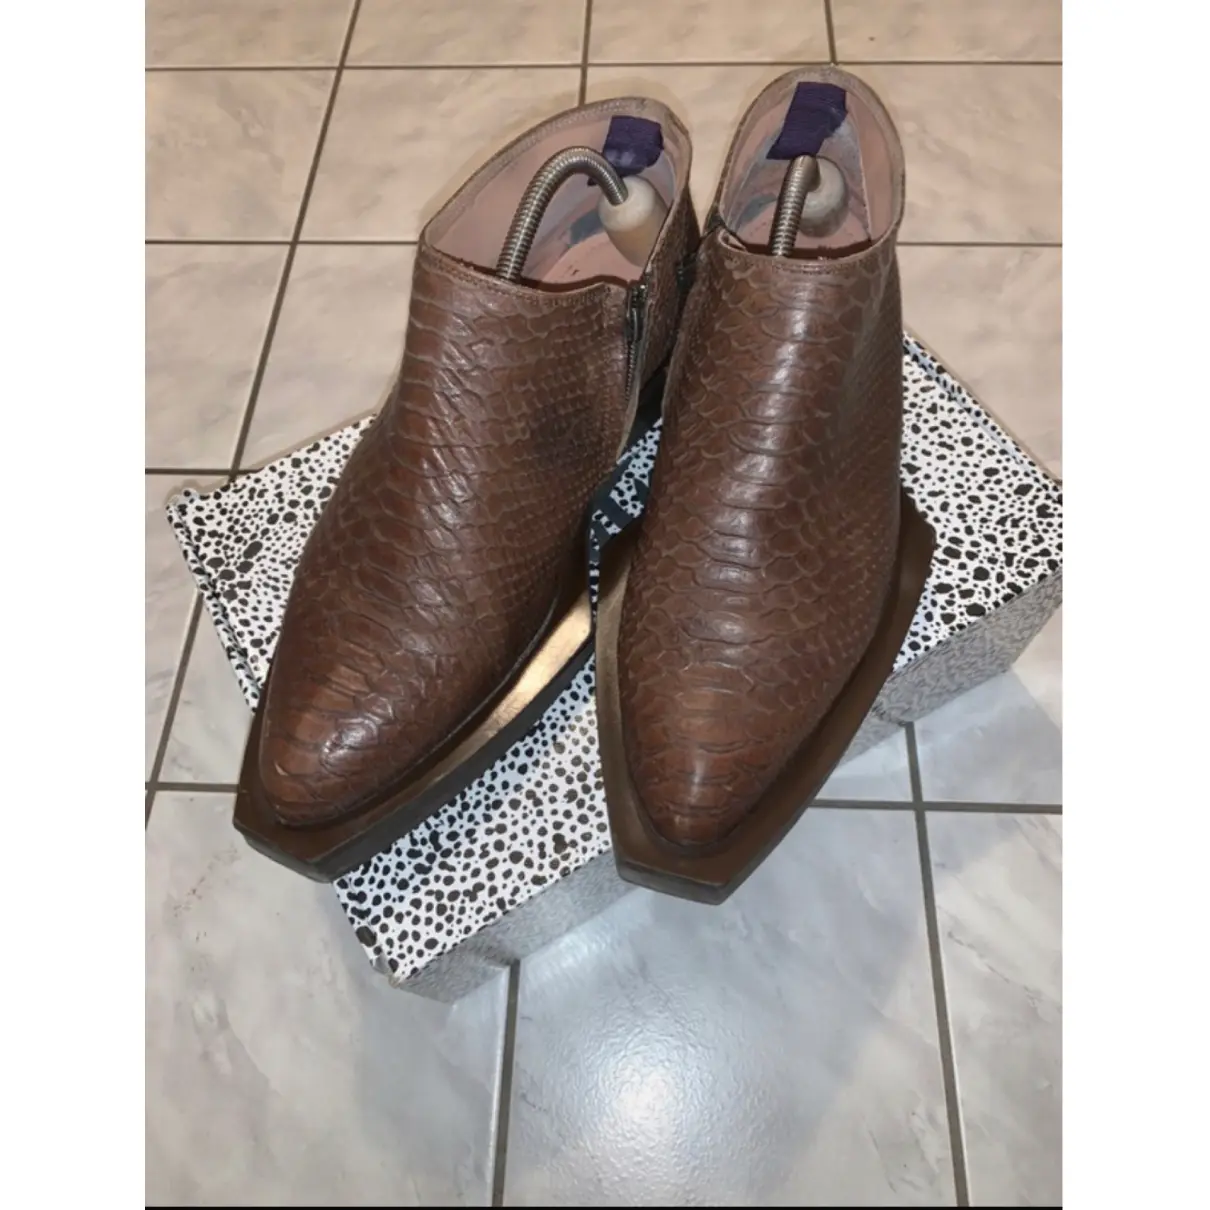 Buy Eytys Leather boots online